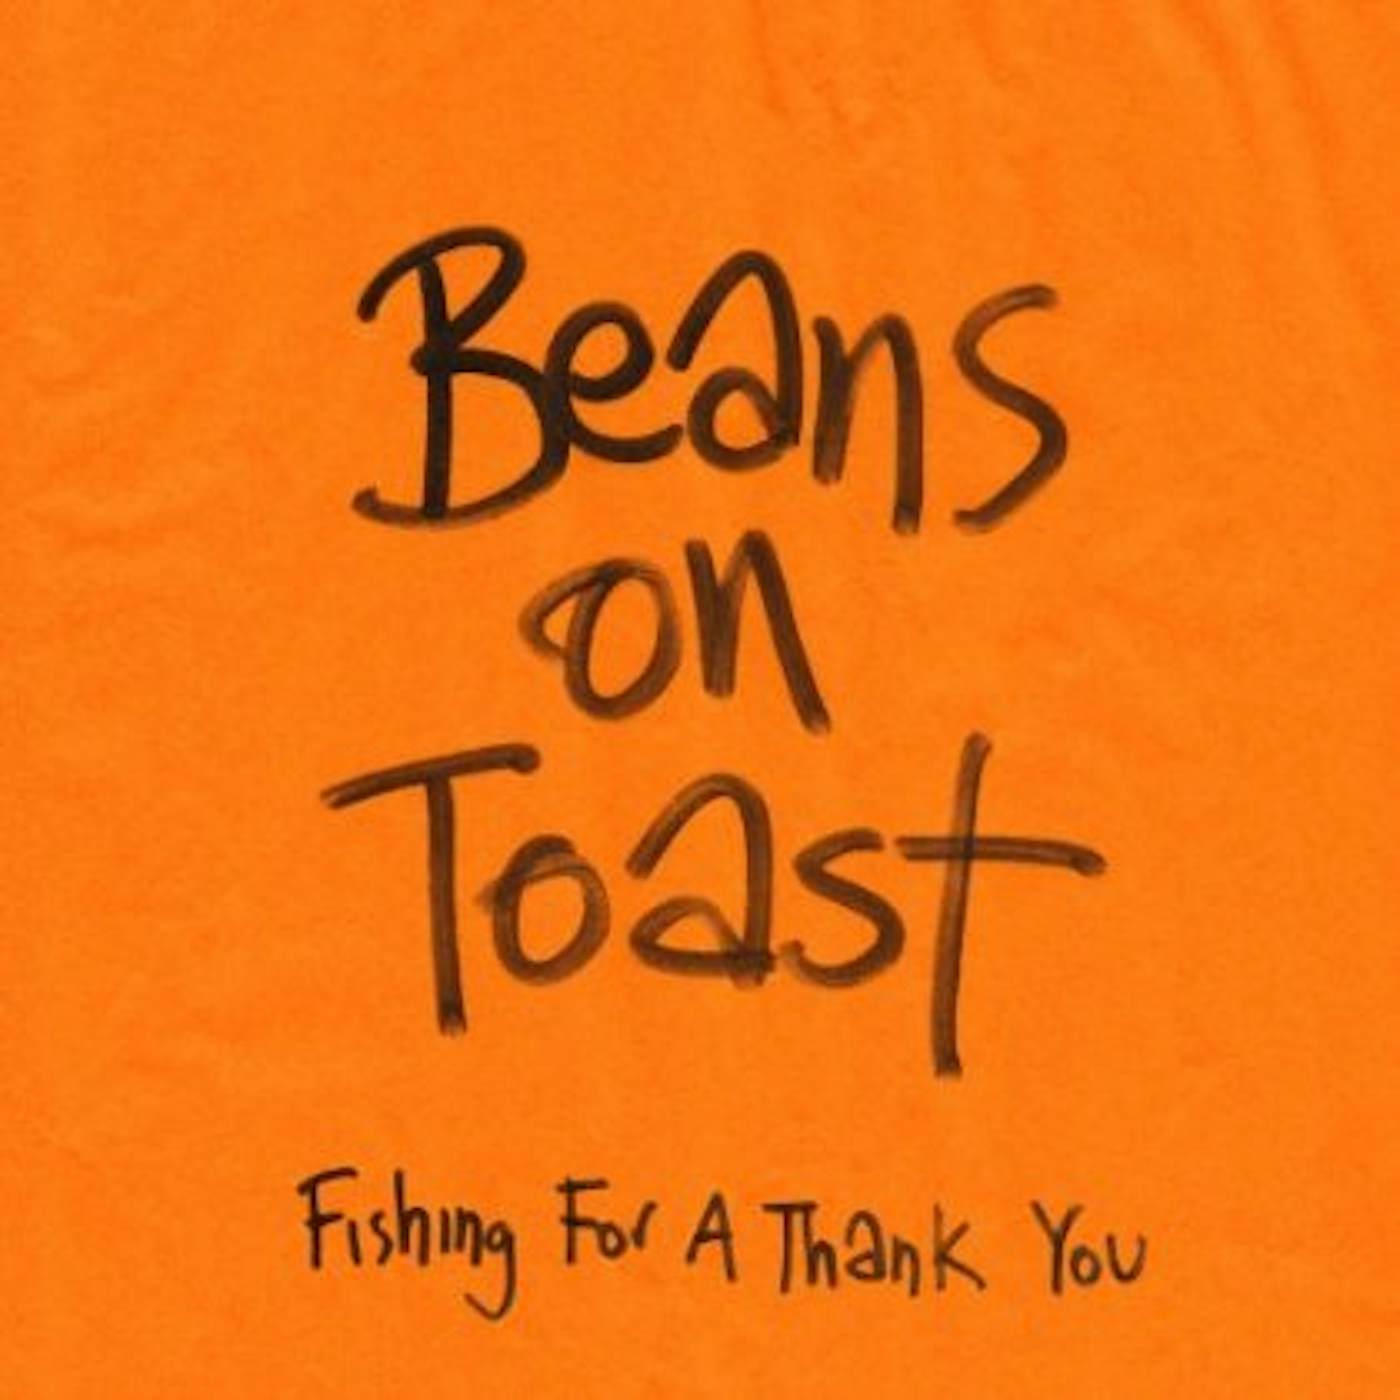 Beans on Toast FISHING FOR A THANK YOU CD